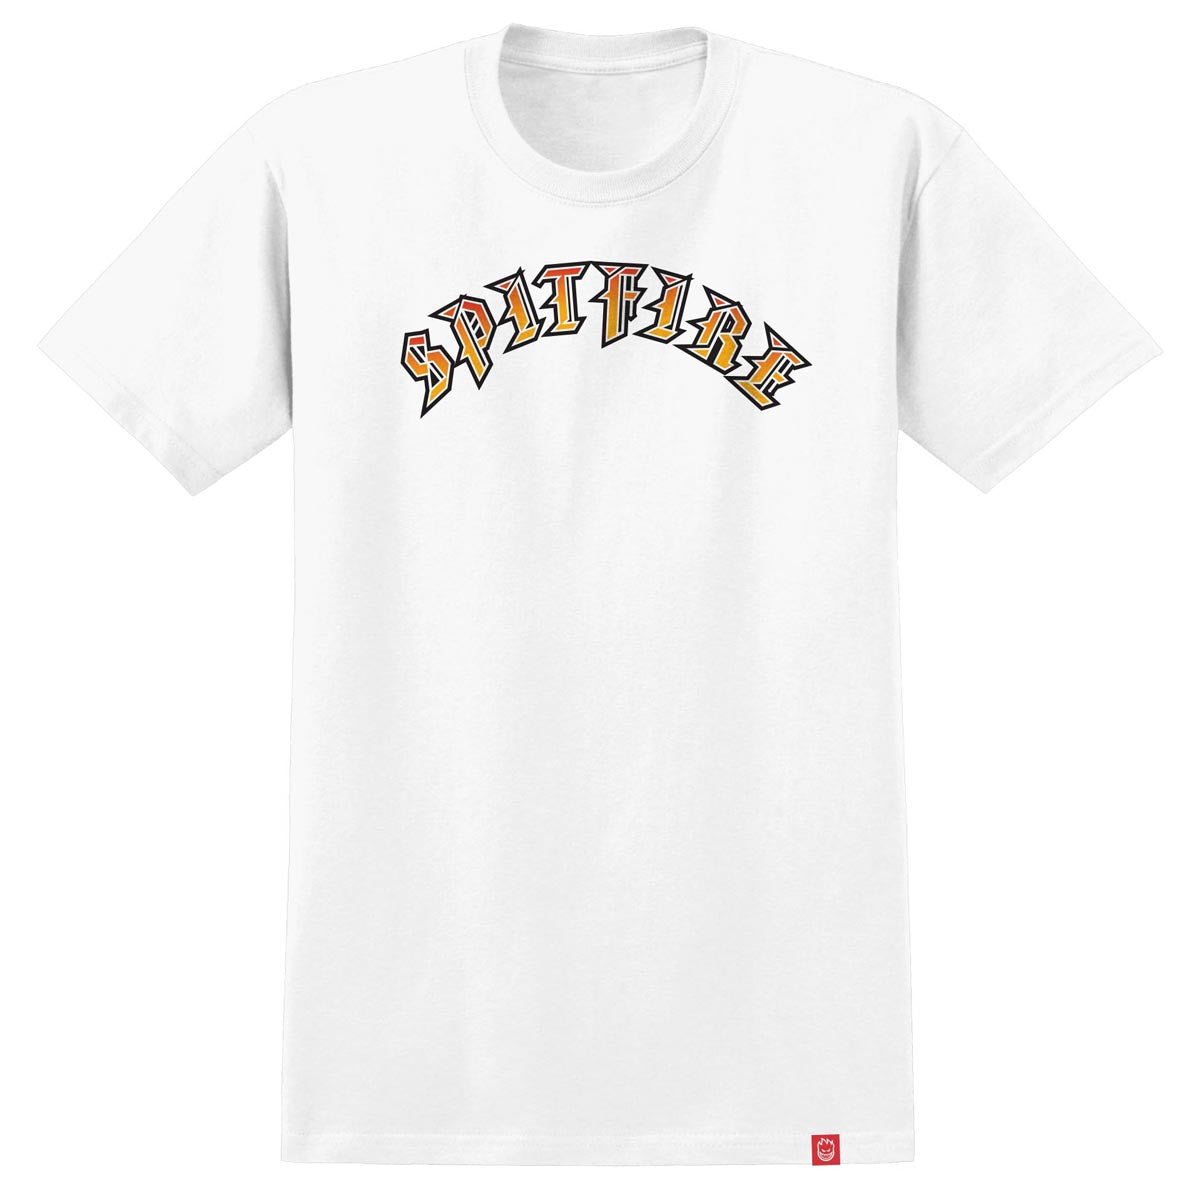 Spitfire Old E Fade Fill T-Shirt - White/Red Gold Fade image 1